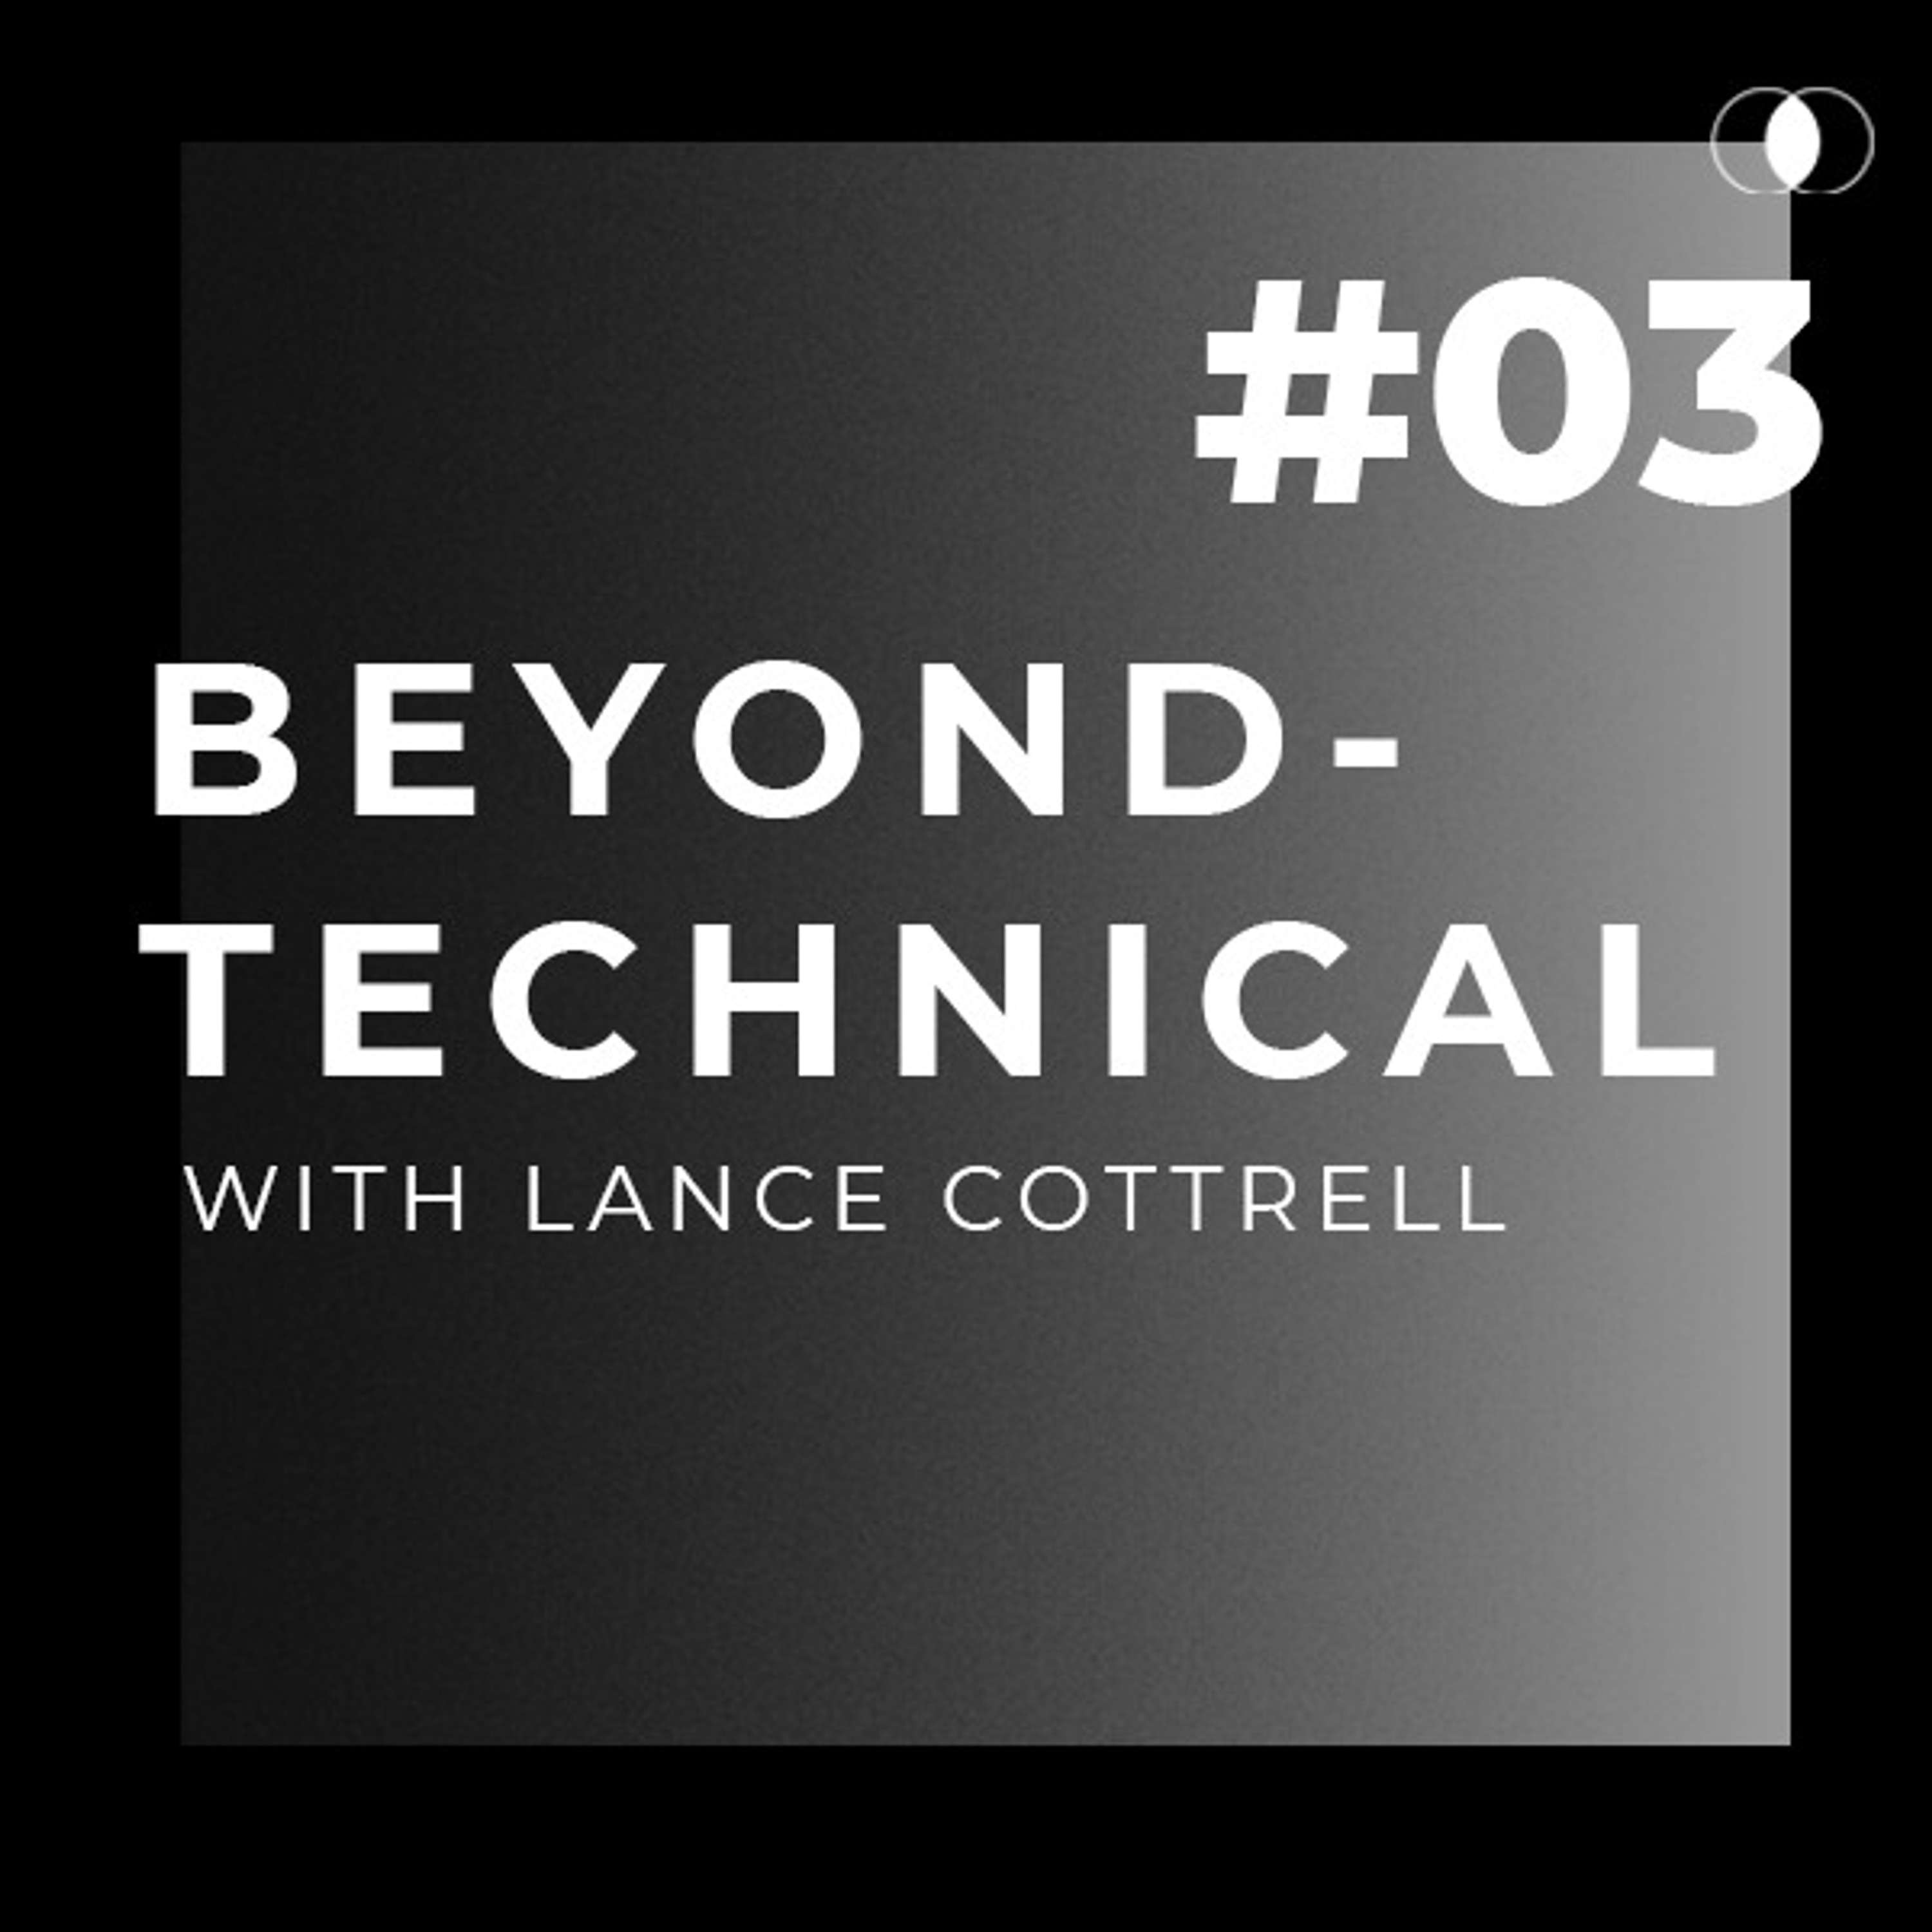 Building a viable business as an early-stage founder | #03 Beyond Technical - Lance Cottrell and Daniel Weinmann